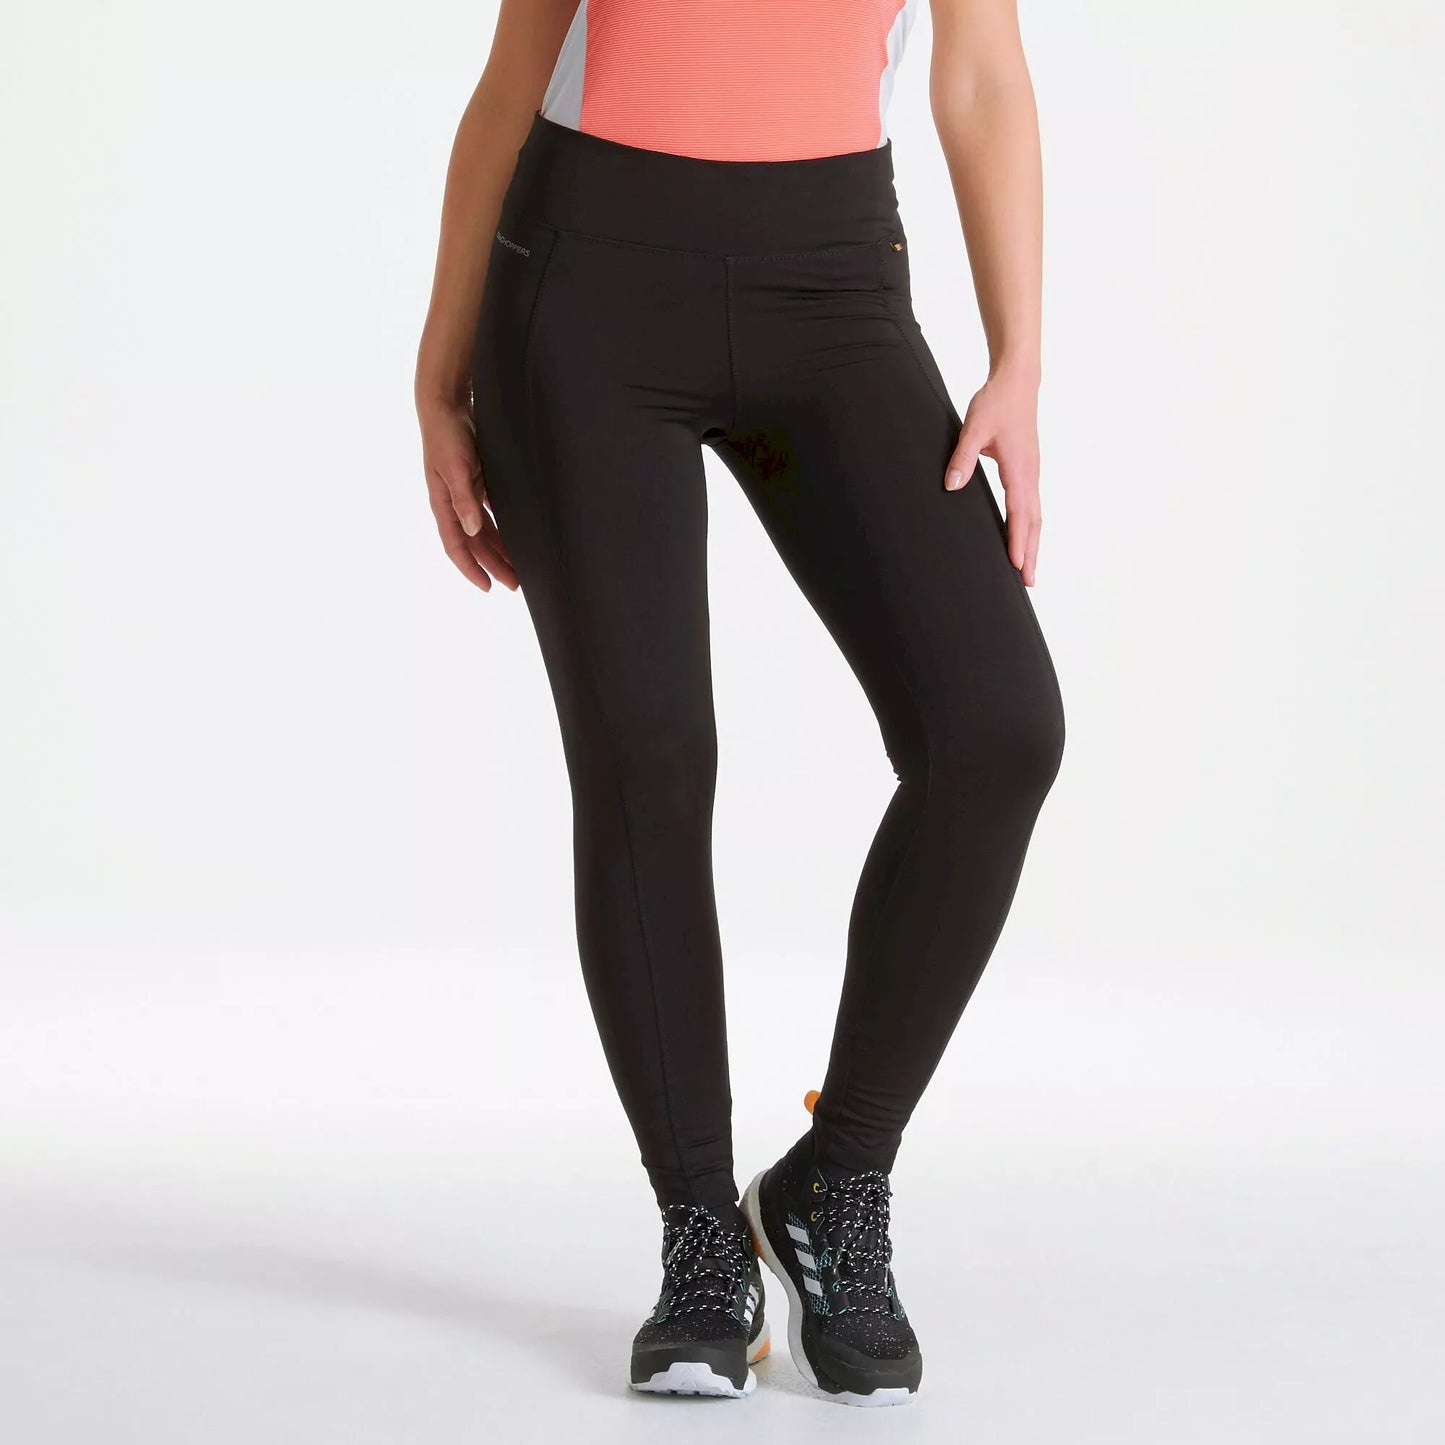 Craghoppers Velocity Tights